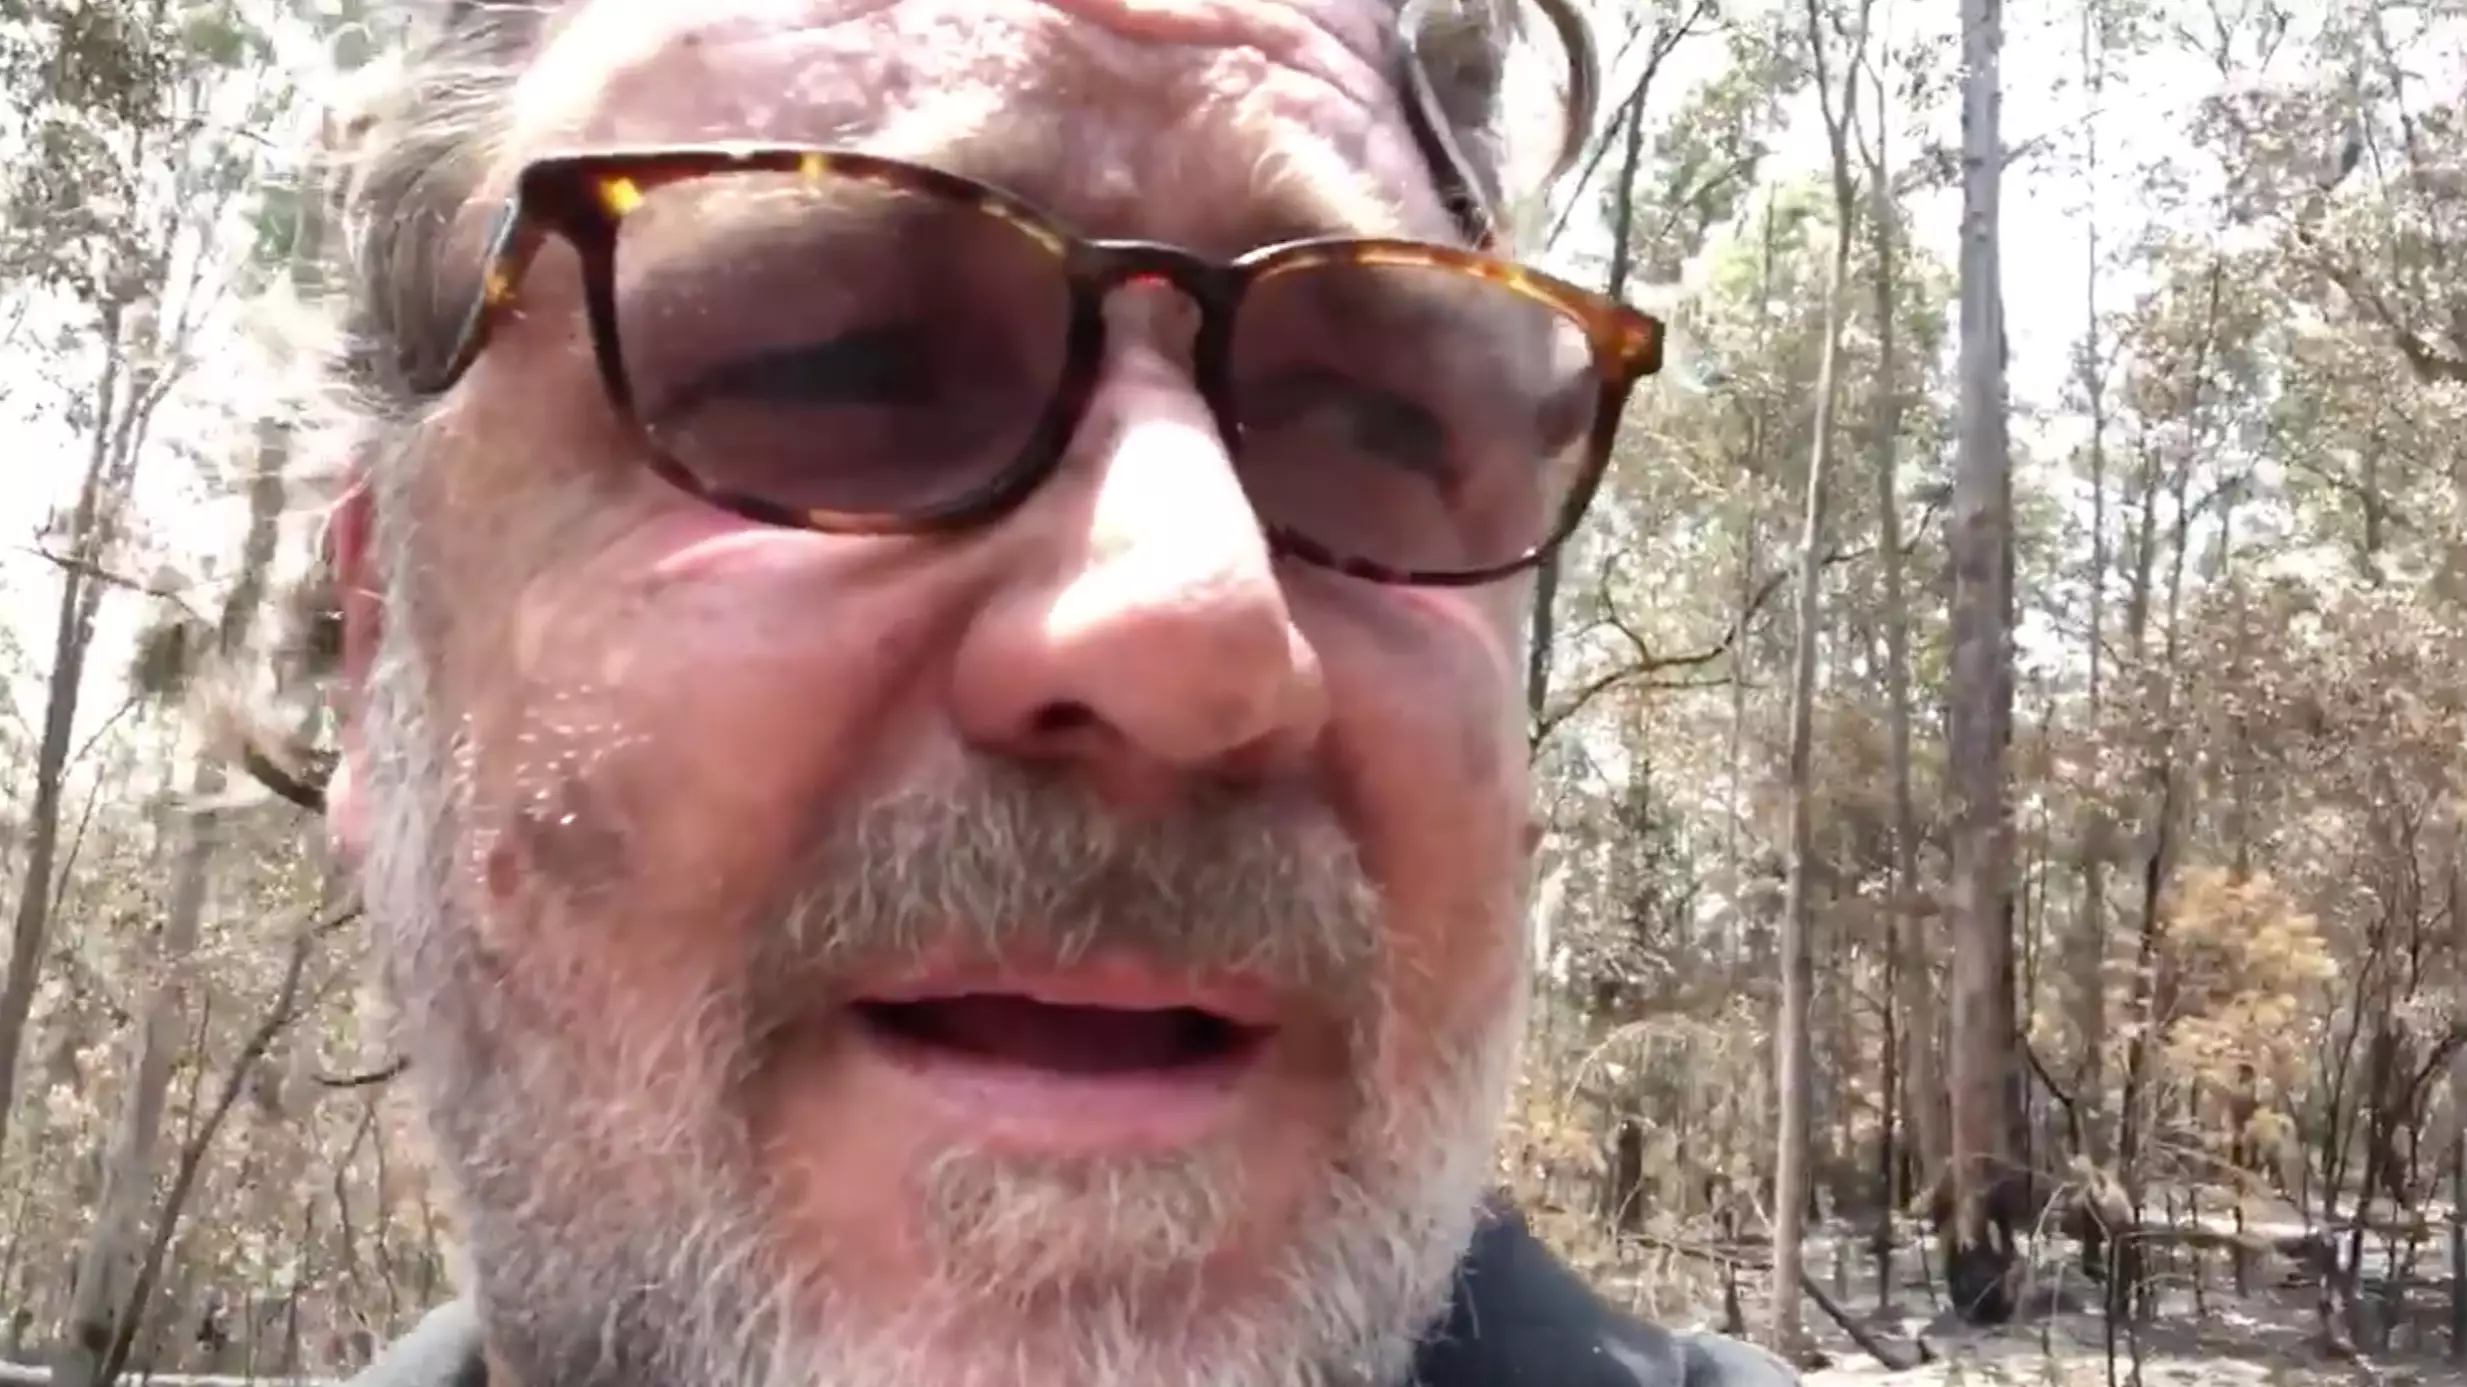 Russell Crowe Uses Golden Globes Award Win To Send Message About The Bushfire Crisis